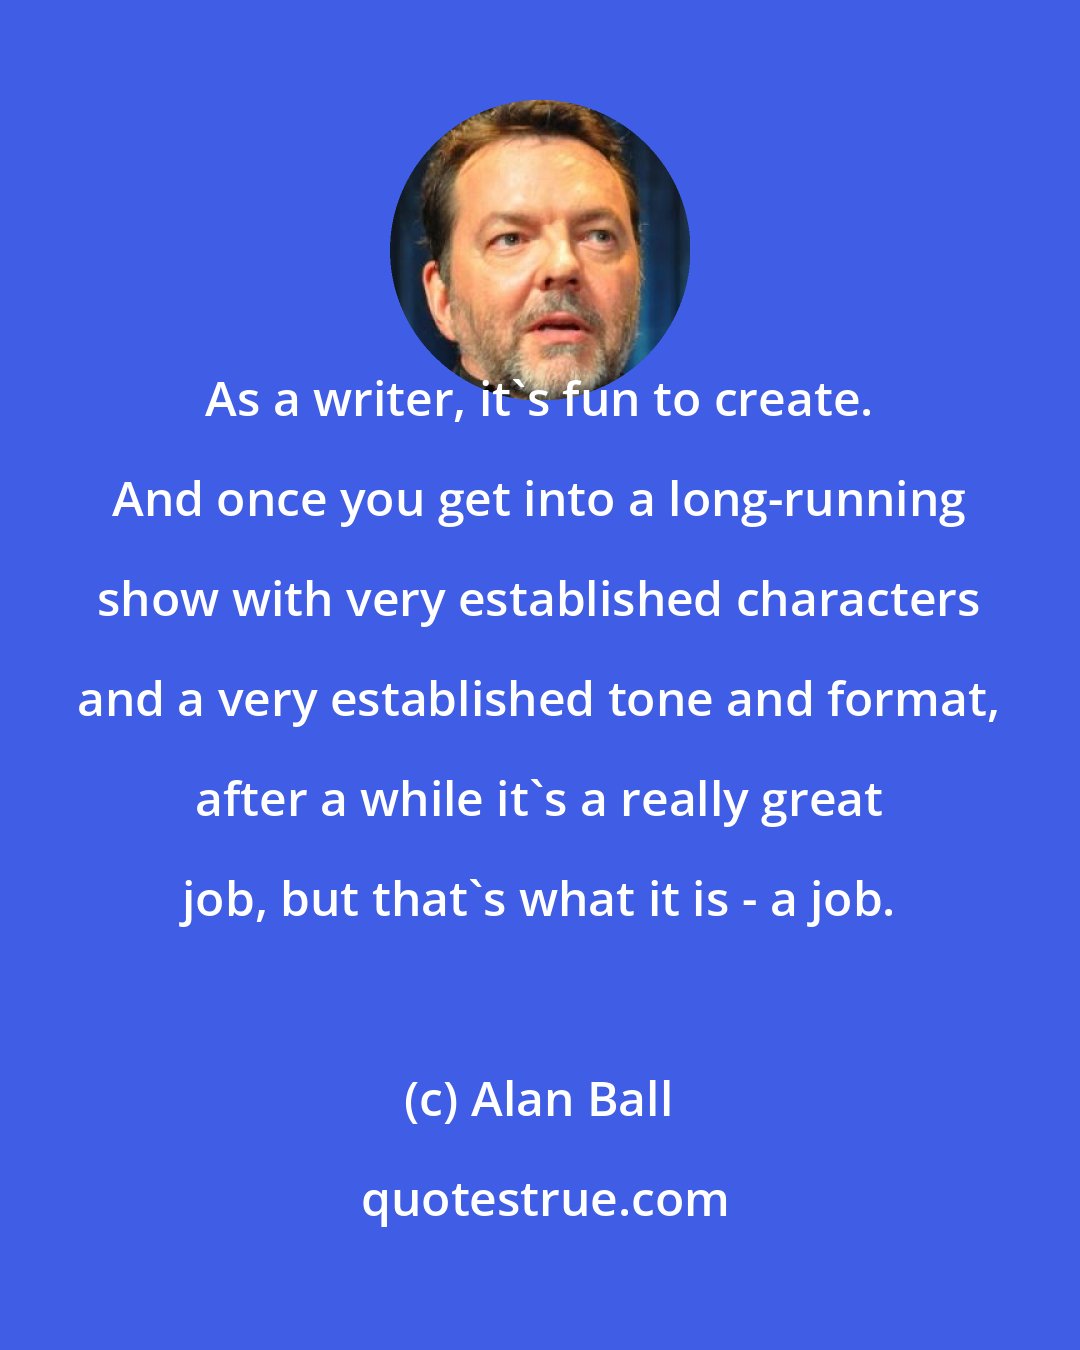 Alan Ball: As a writer, it's fun to create. And once you get into a long-running show with very established characters and a very established tone and format, after a while it's a really great job, but that's what it is - a job.